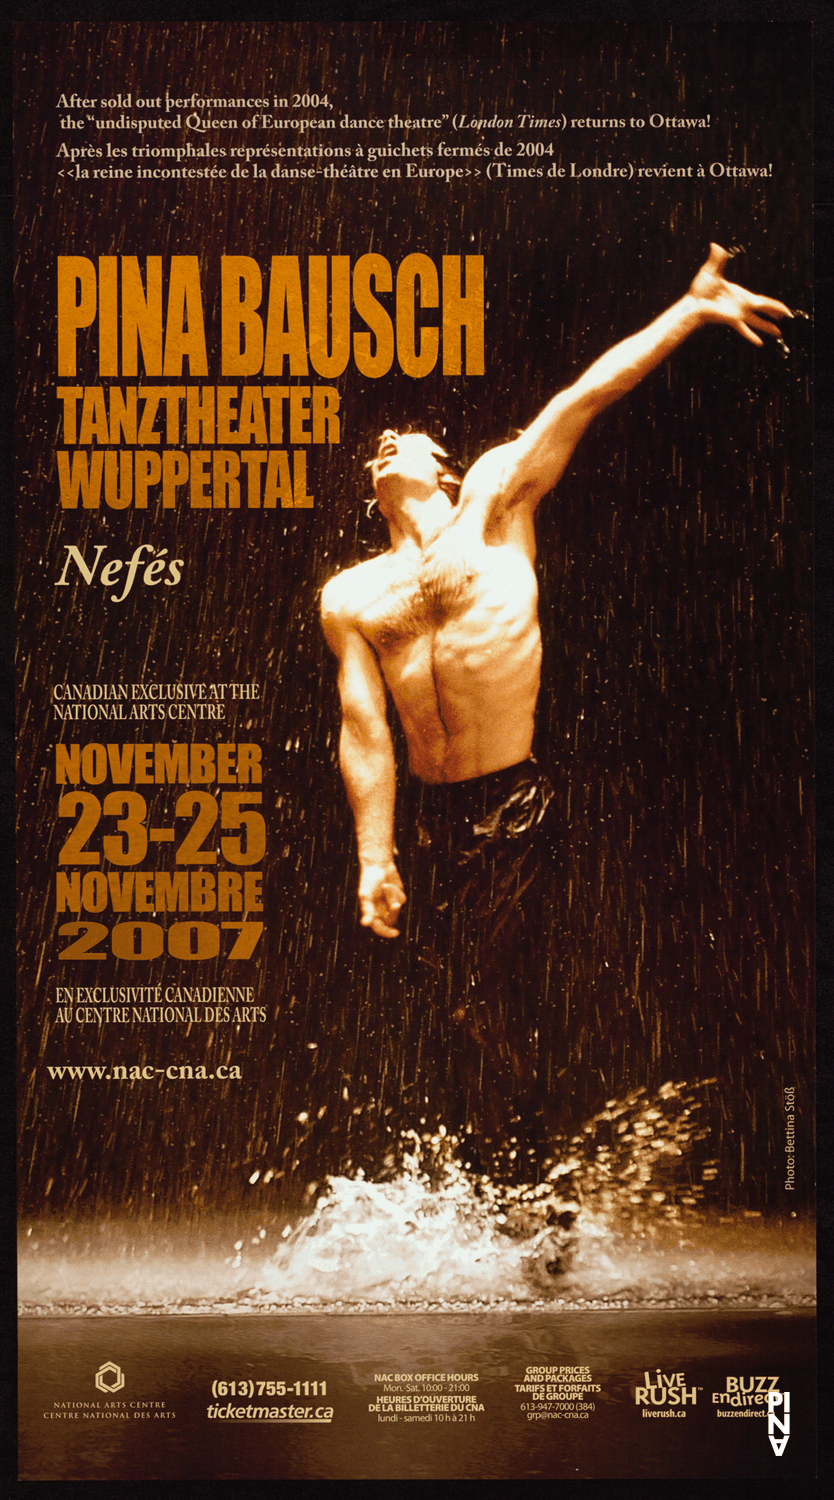 Poster for “Nefés” by Pina Bausch in Ottawa, 11/23/2007 – 11/25/2007